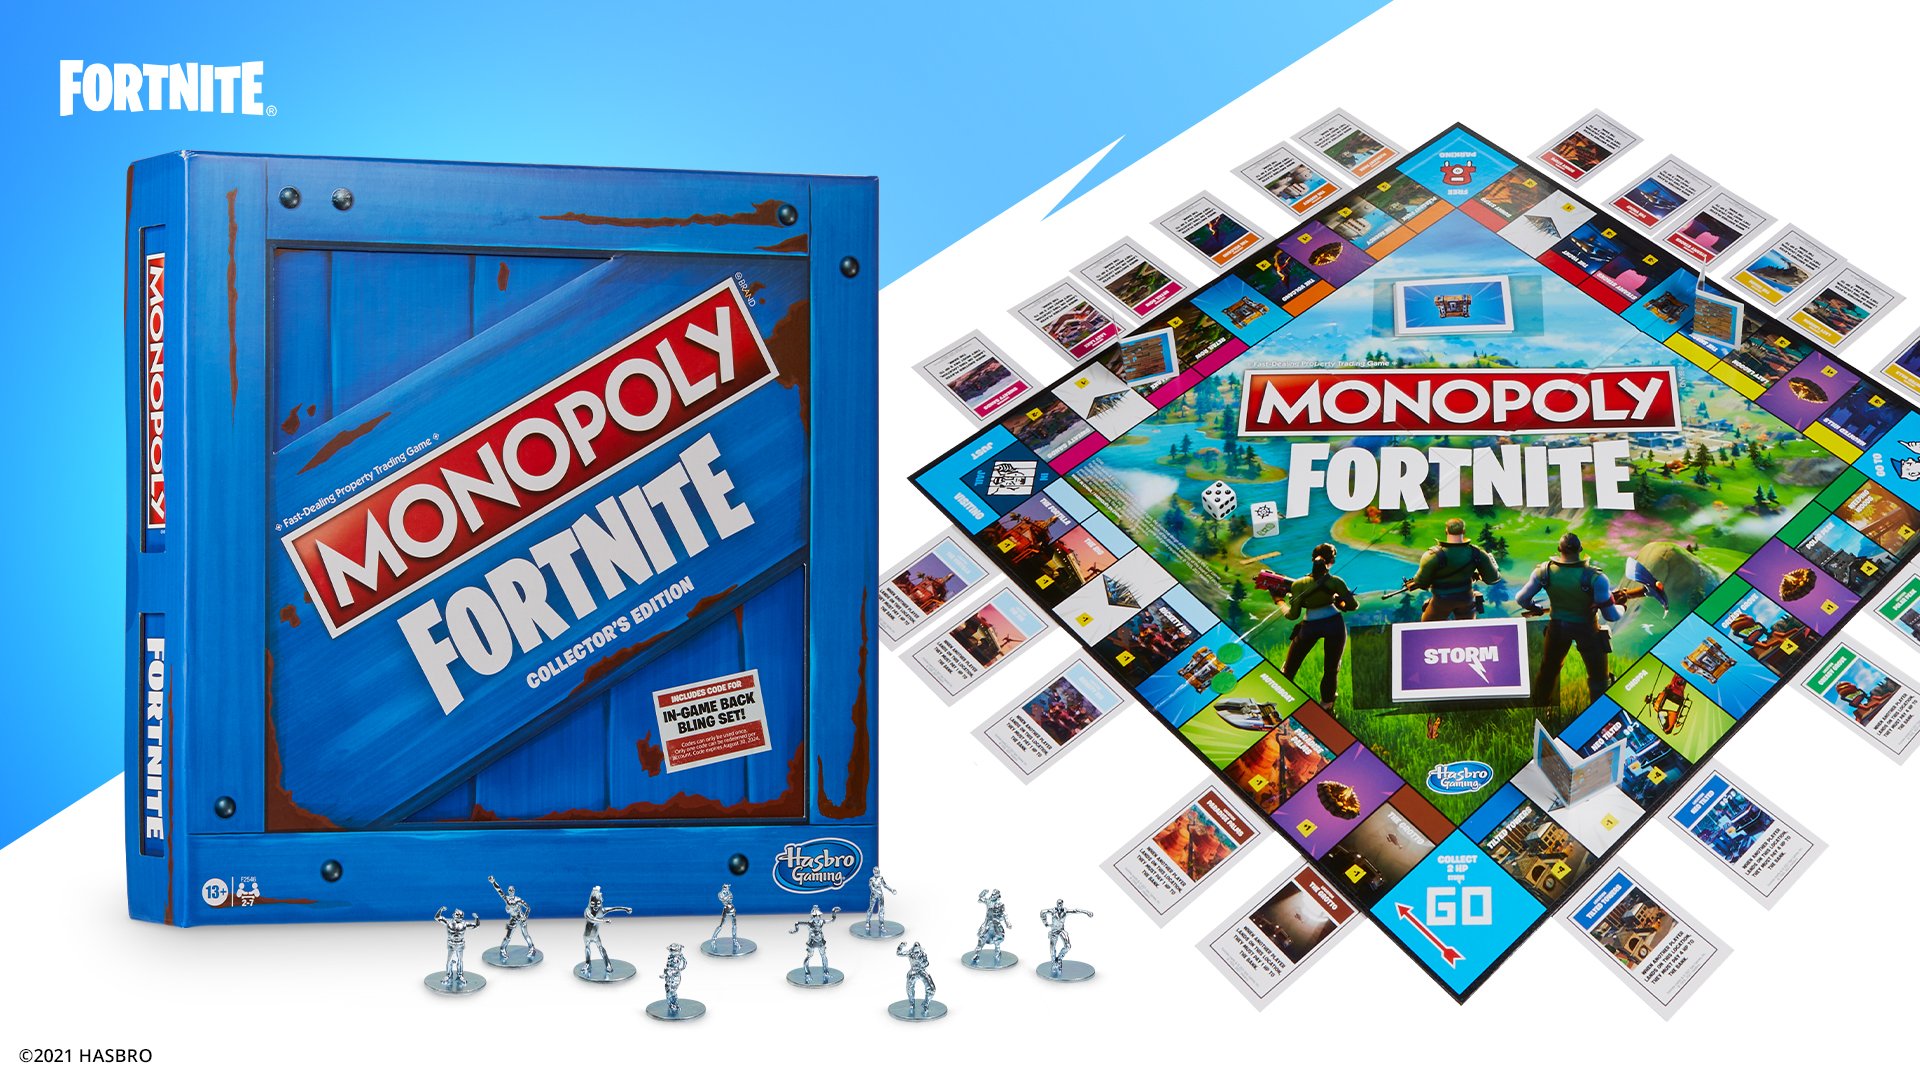 You can get Monopoly back blings in Fortnite for purchasing a board game by Hasbro 